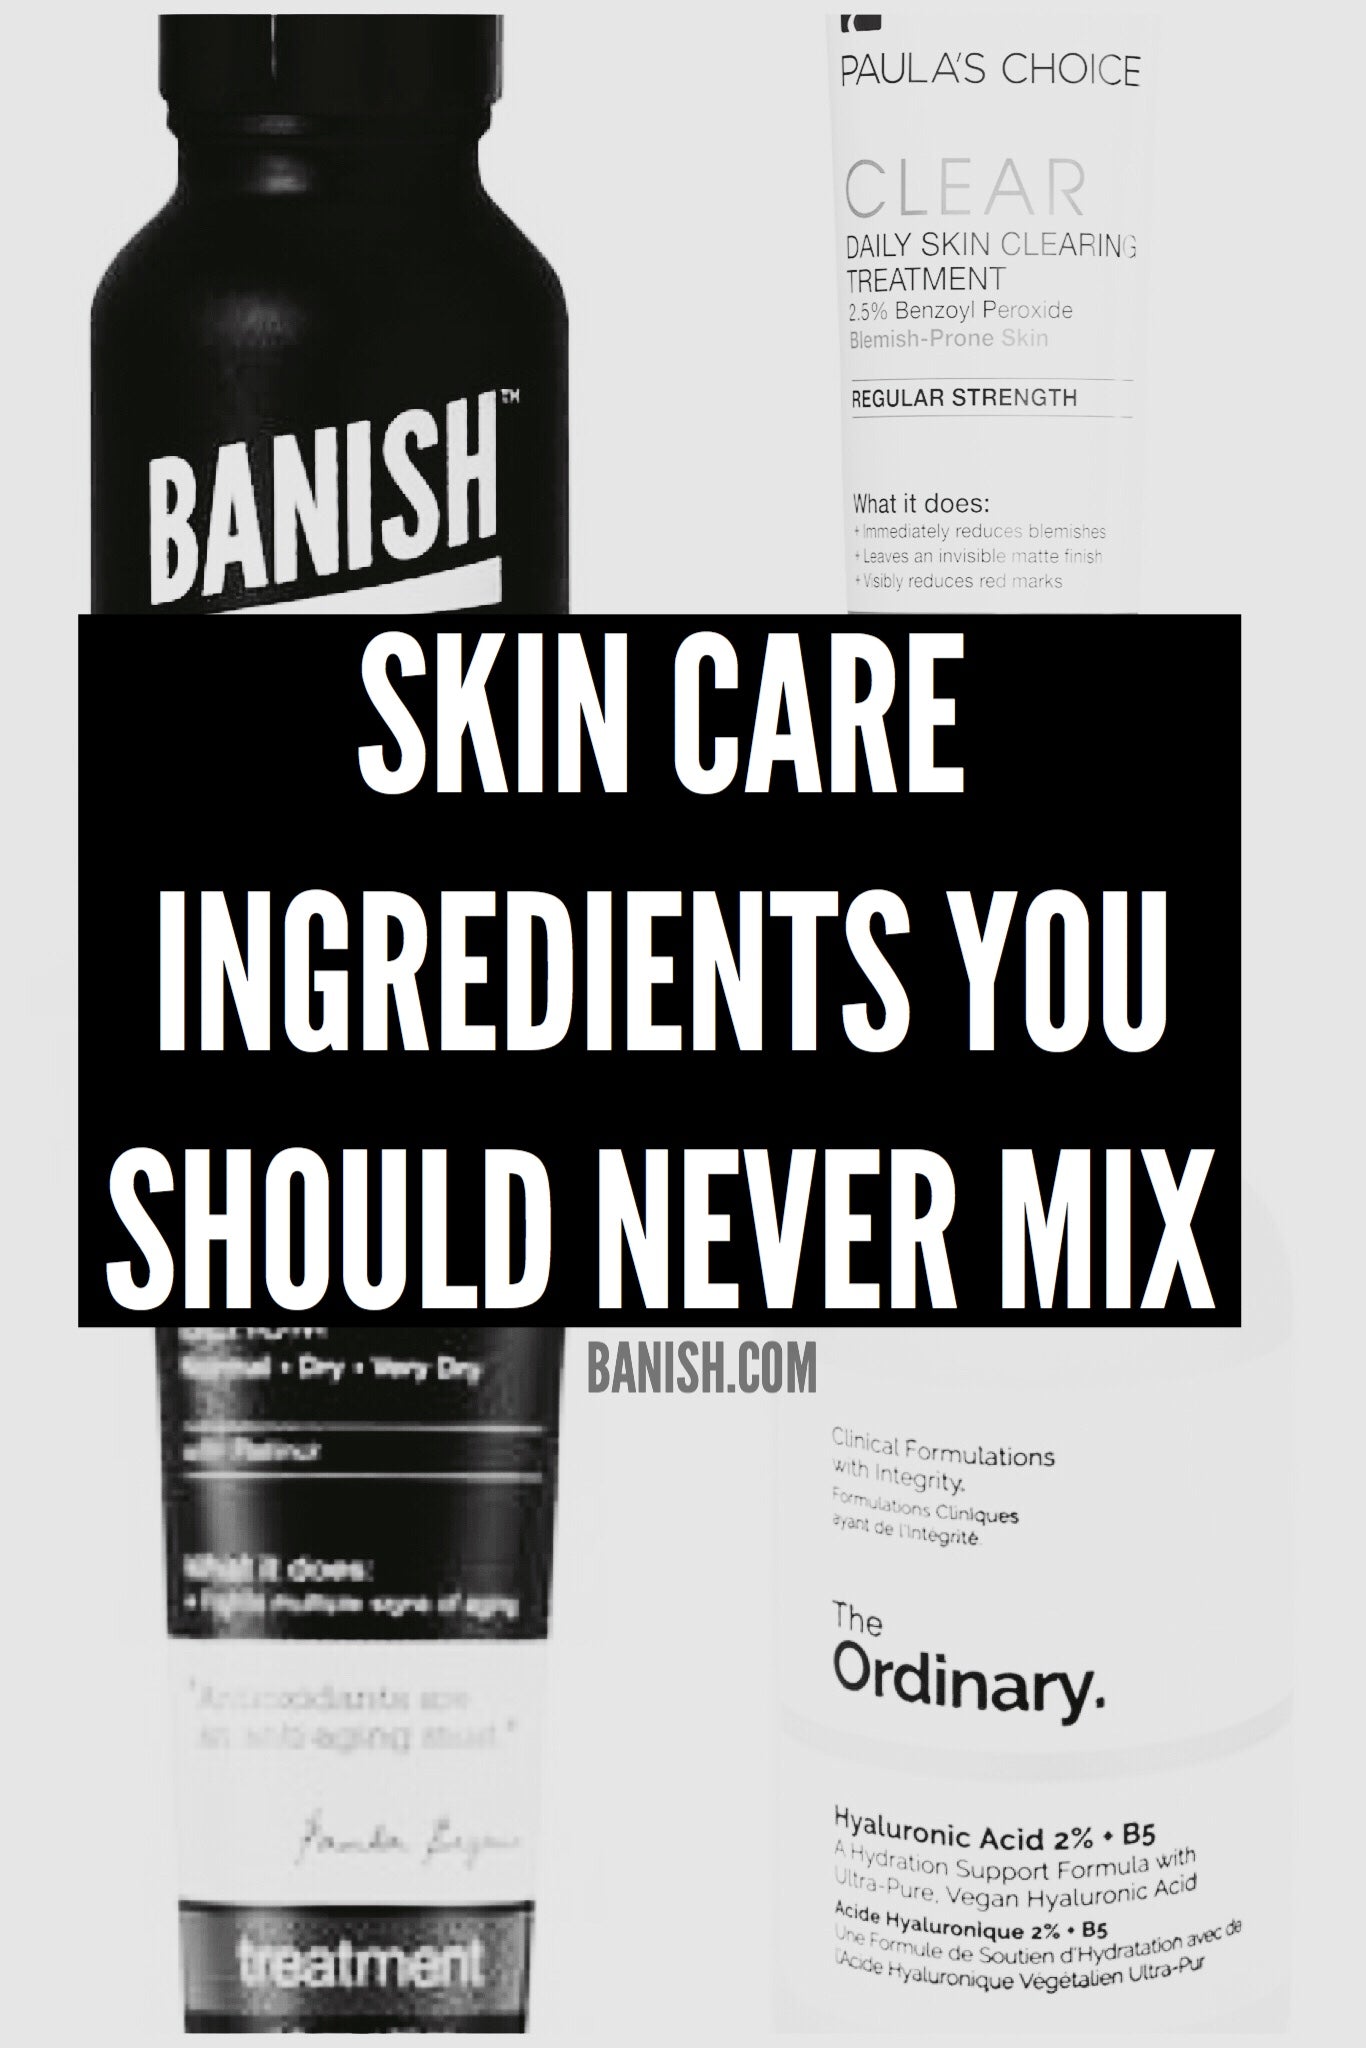 Skincare Ingredients You Shouldn't Mix